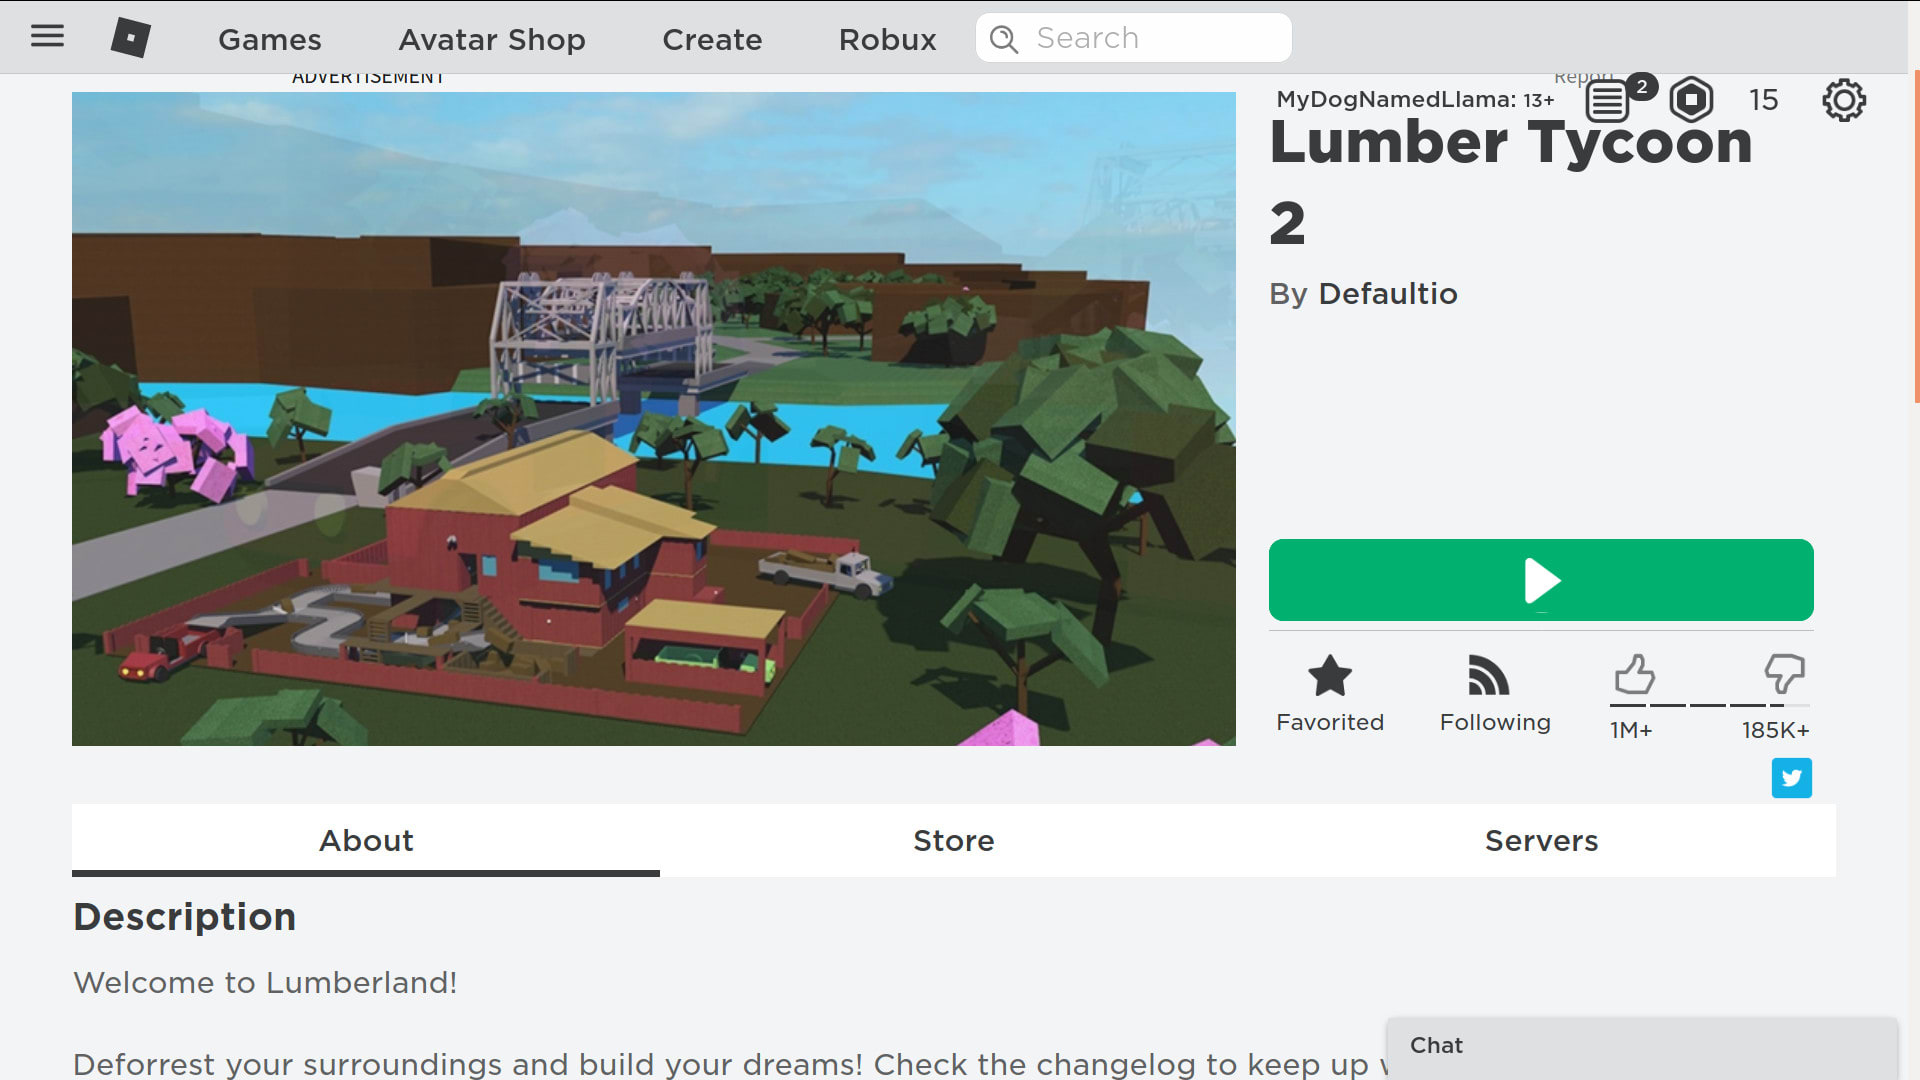 Join Your Roblox Lumbertycoon2 Server And Give You An Alpha Axe By Floofball 142 - alpha axe roblox